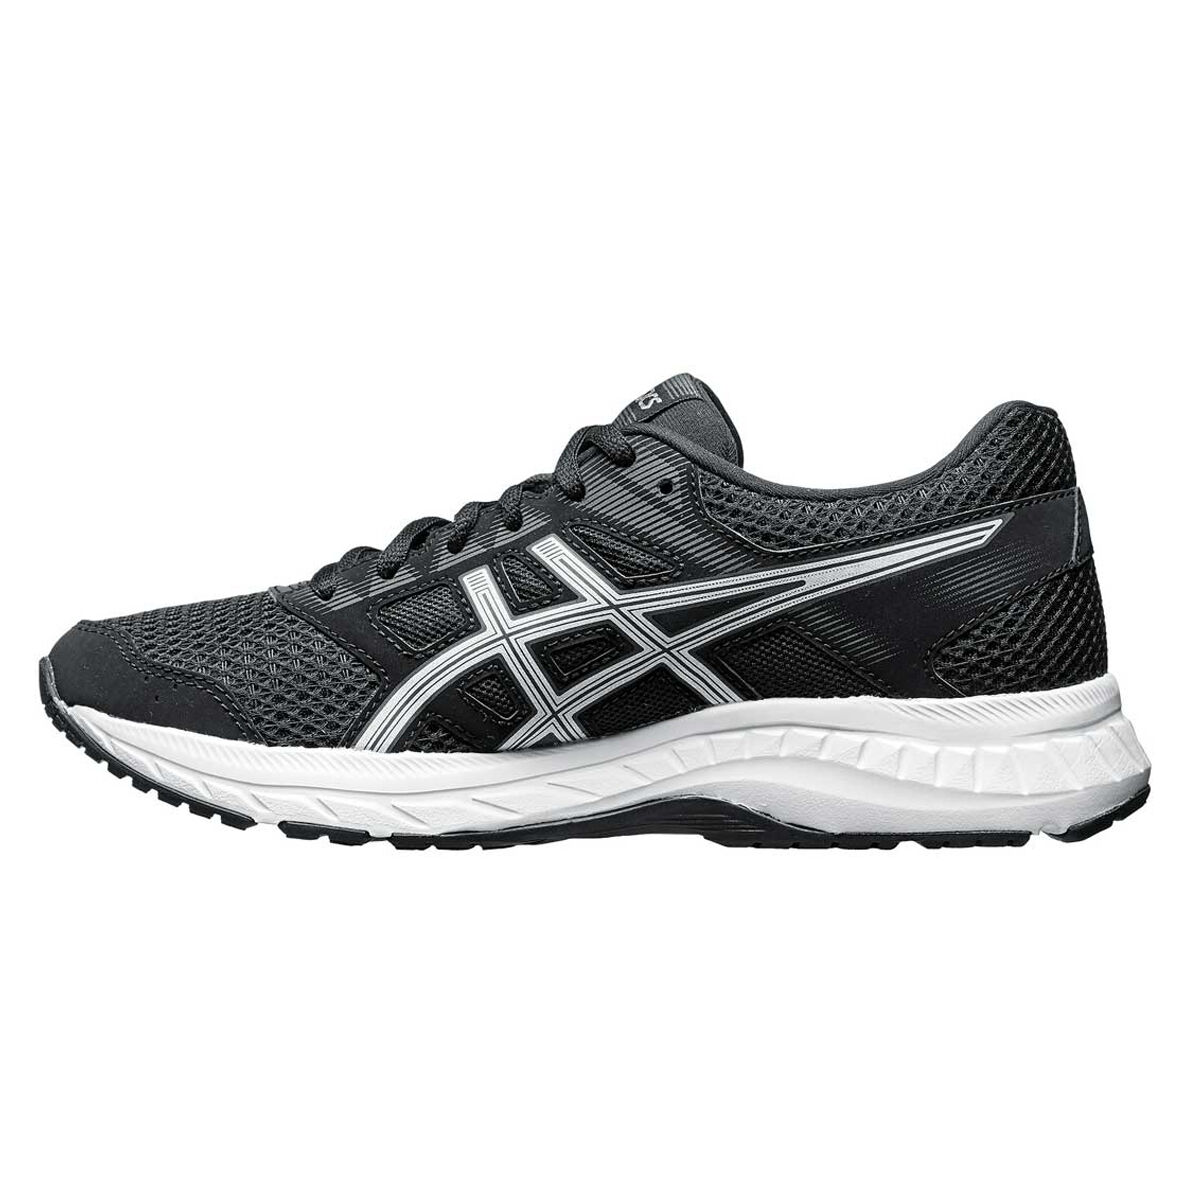 asics contend 5 review